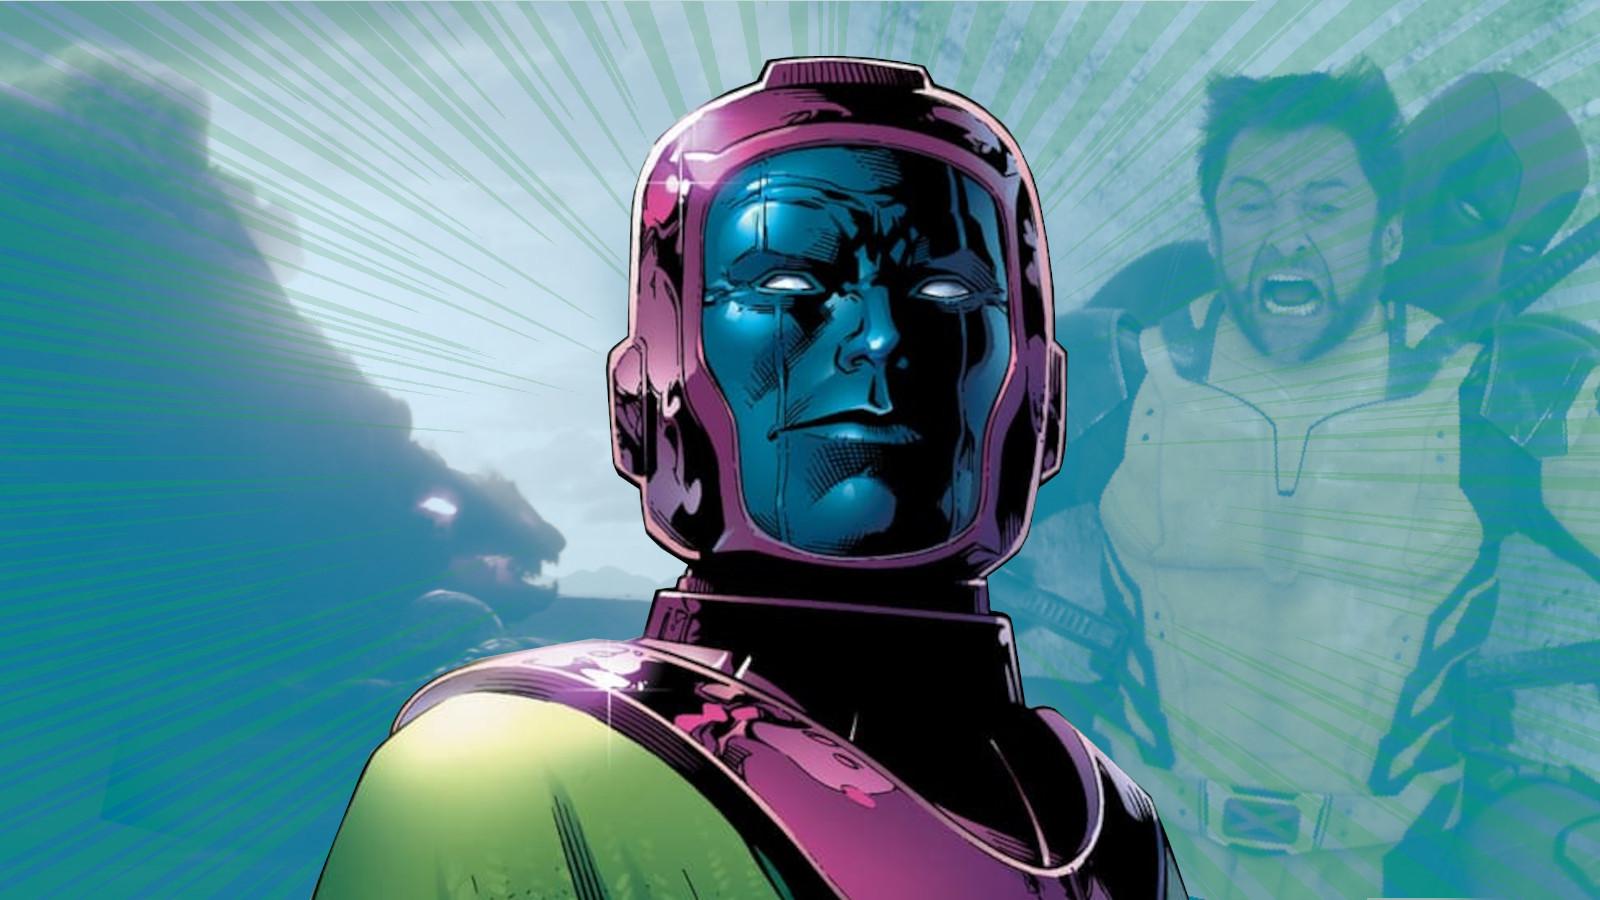 Kang the Conqueror smiles while scenes from Deadpool 3 play out in the background.